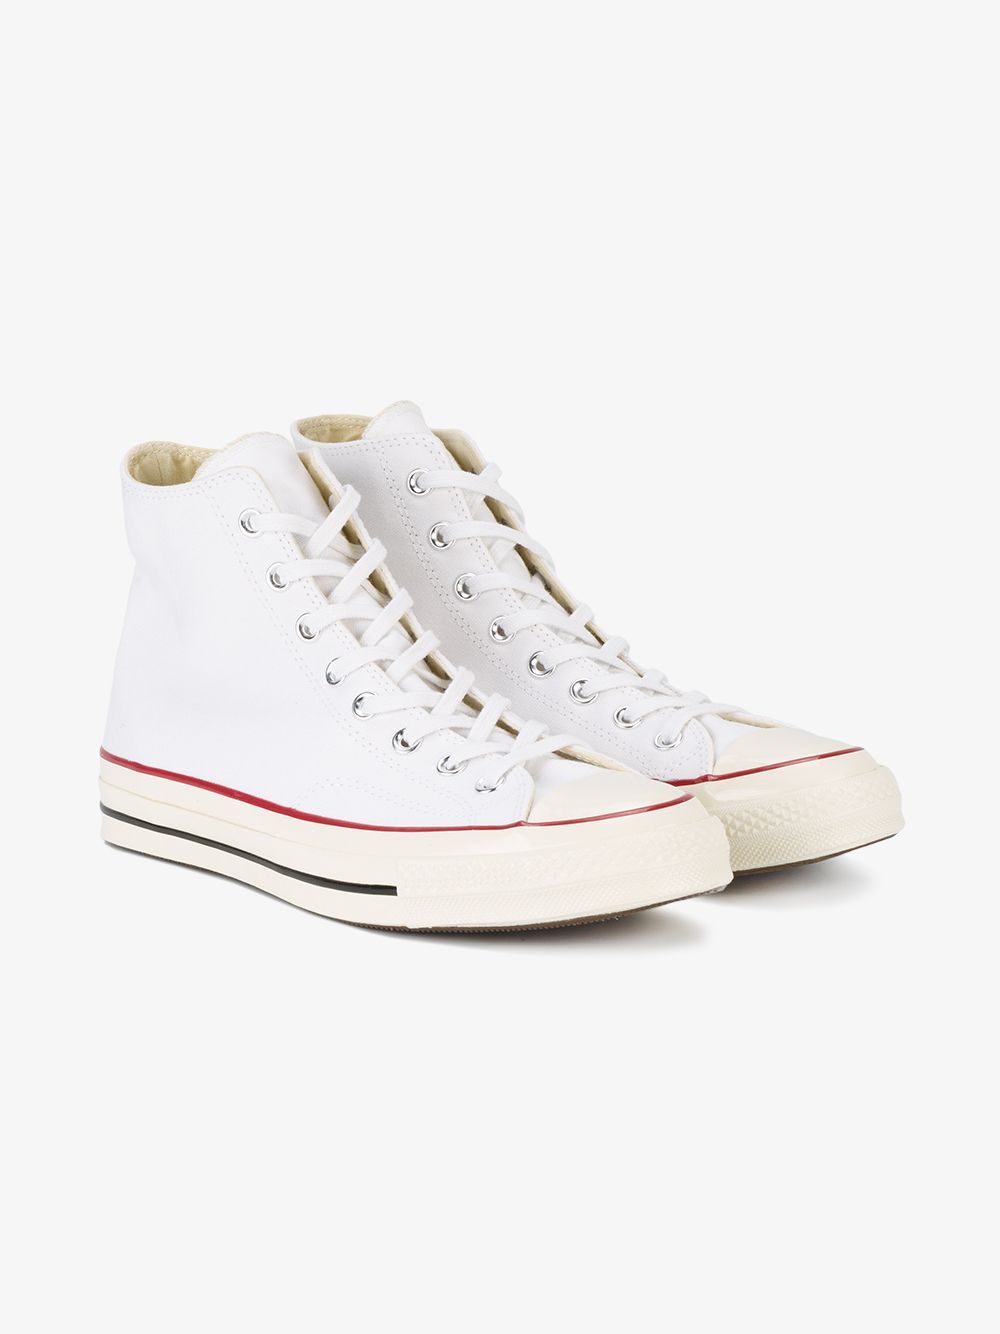 Converse White All Star Hi 70s Trainers | Browns Fashion